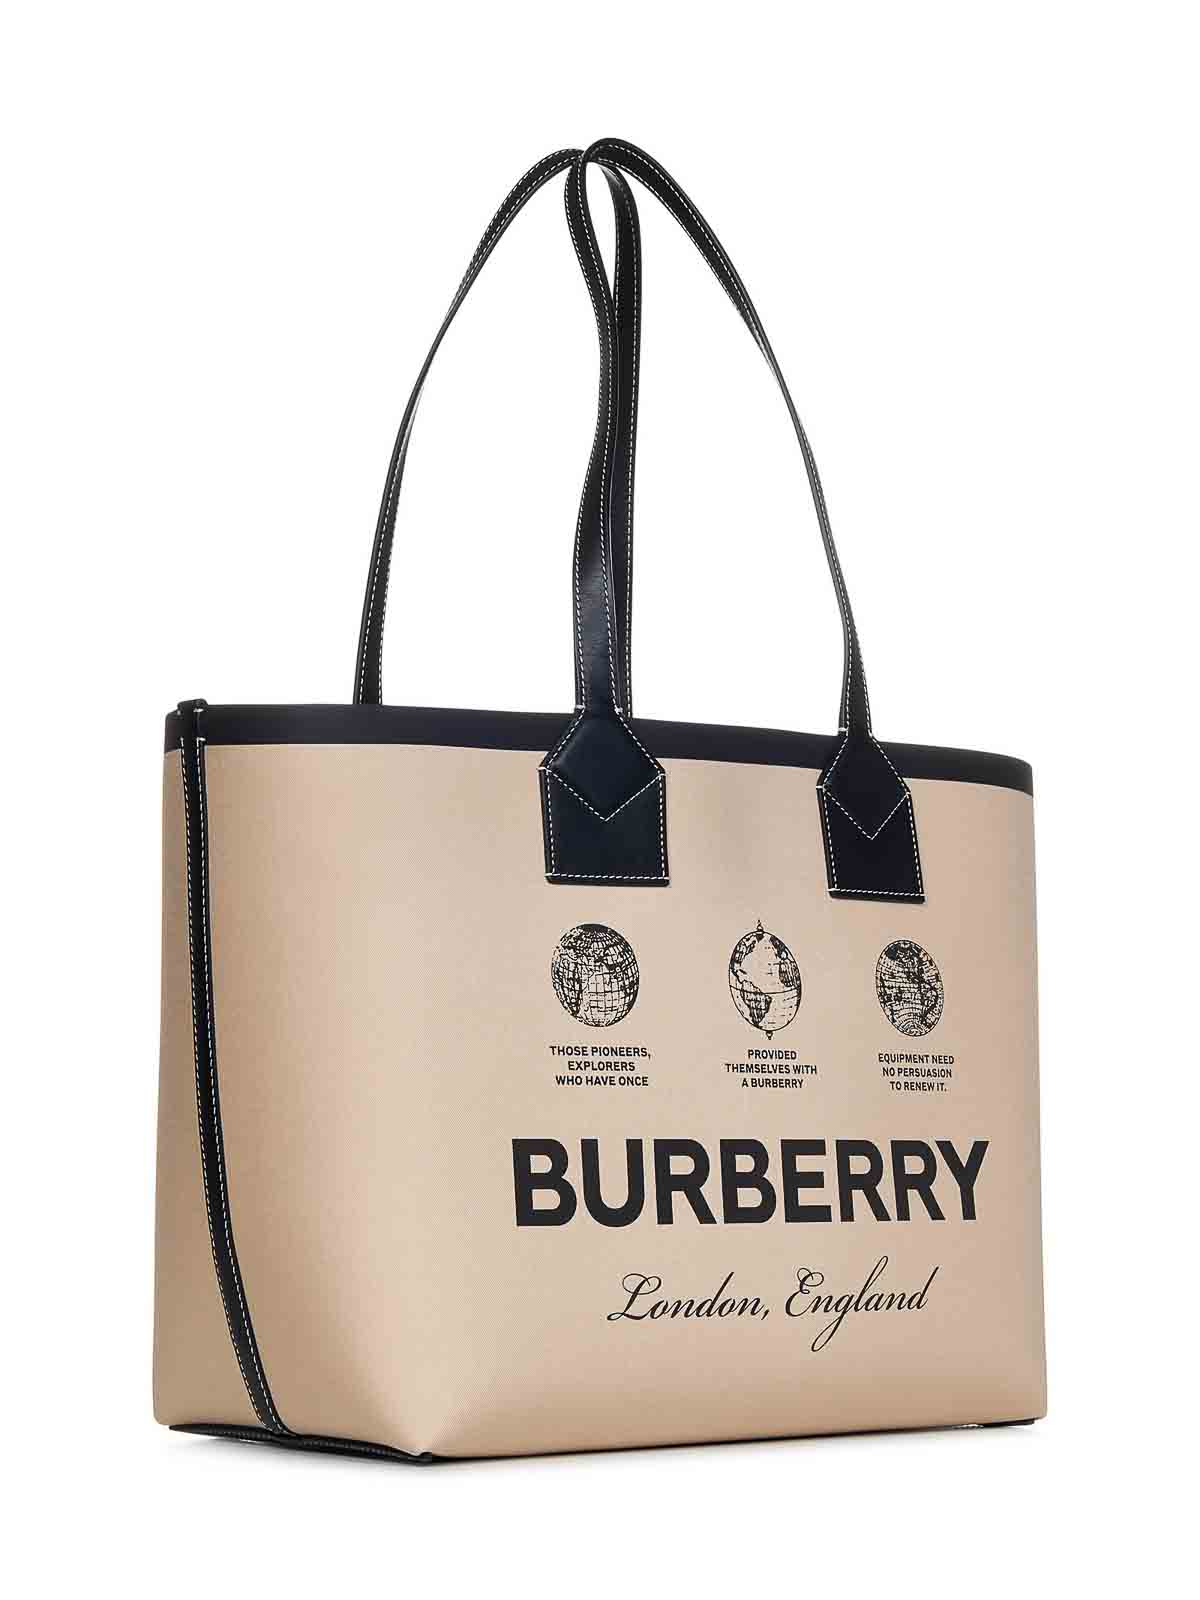 The Price of Burberry Handbags in South Africa | Luxity